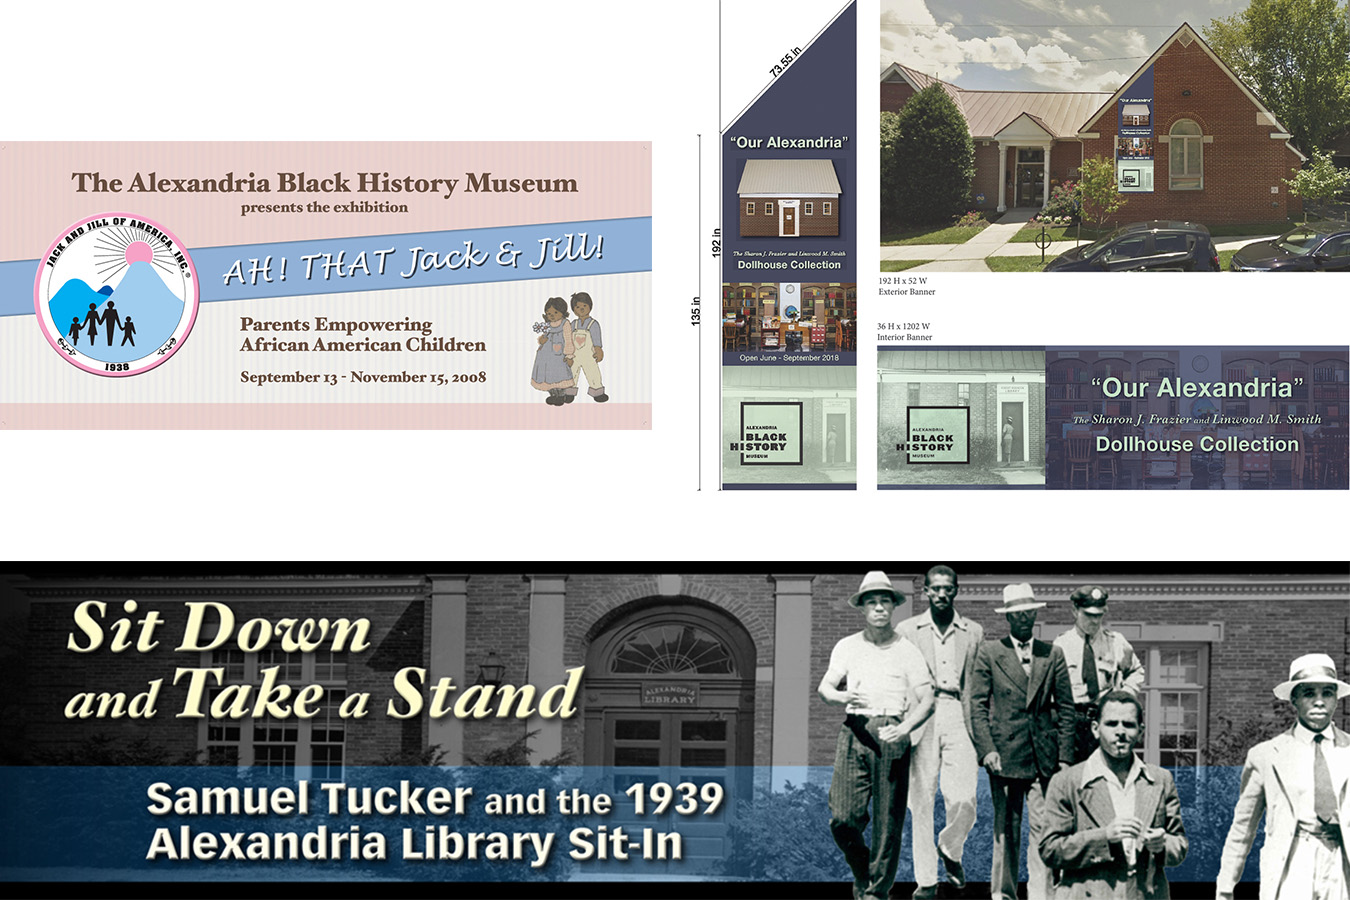  ABHM Banners : Interior and Exterior Wall banners for Alexandria Black History Museum 